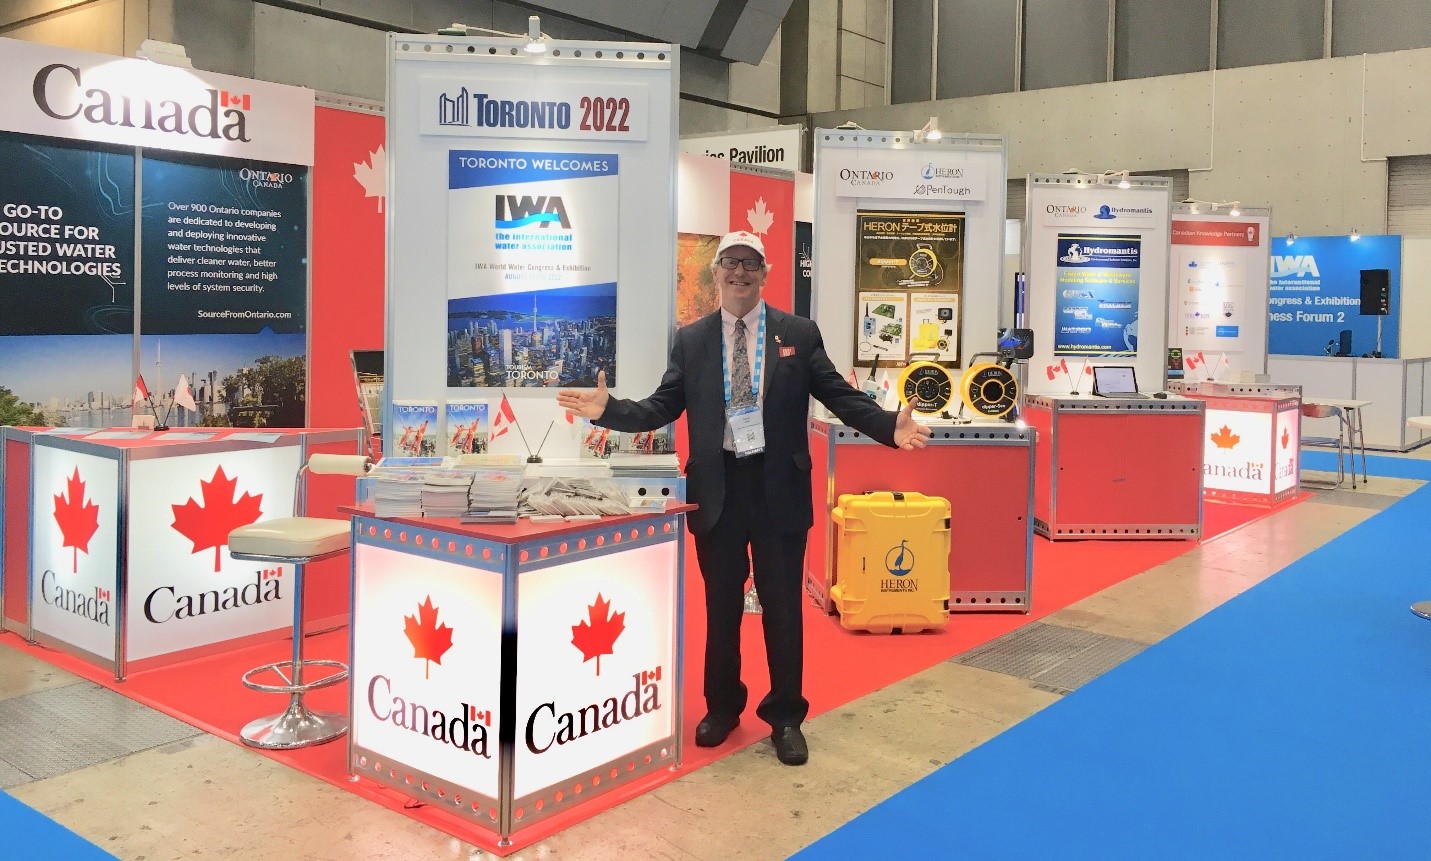 CWWA’s Robert Haller showing off the Canadian Pavilion in Tokyo.